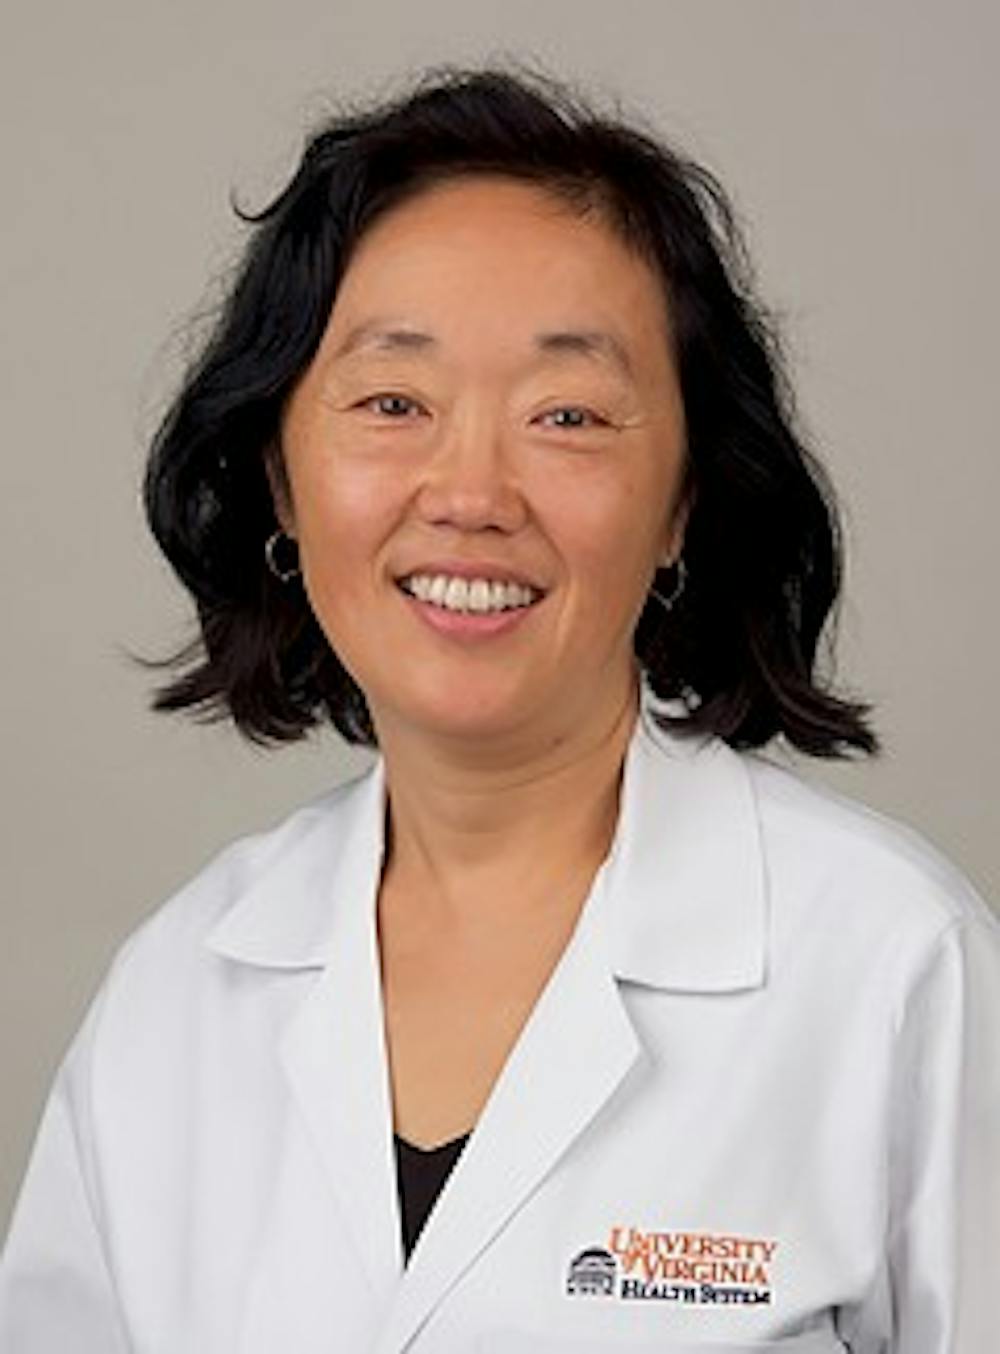 <p>Rachel Moon, division head of General Pediatrics and co-author of the study, published the research in the Journal of Pediatrics in March.</p>